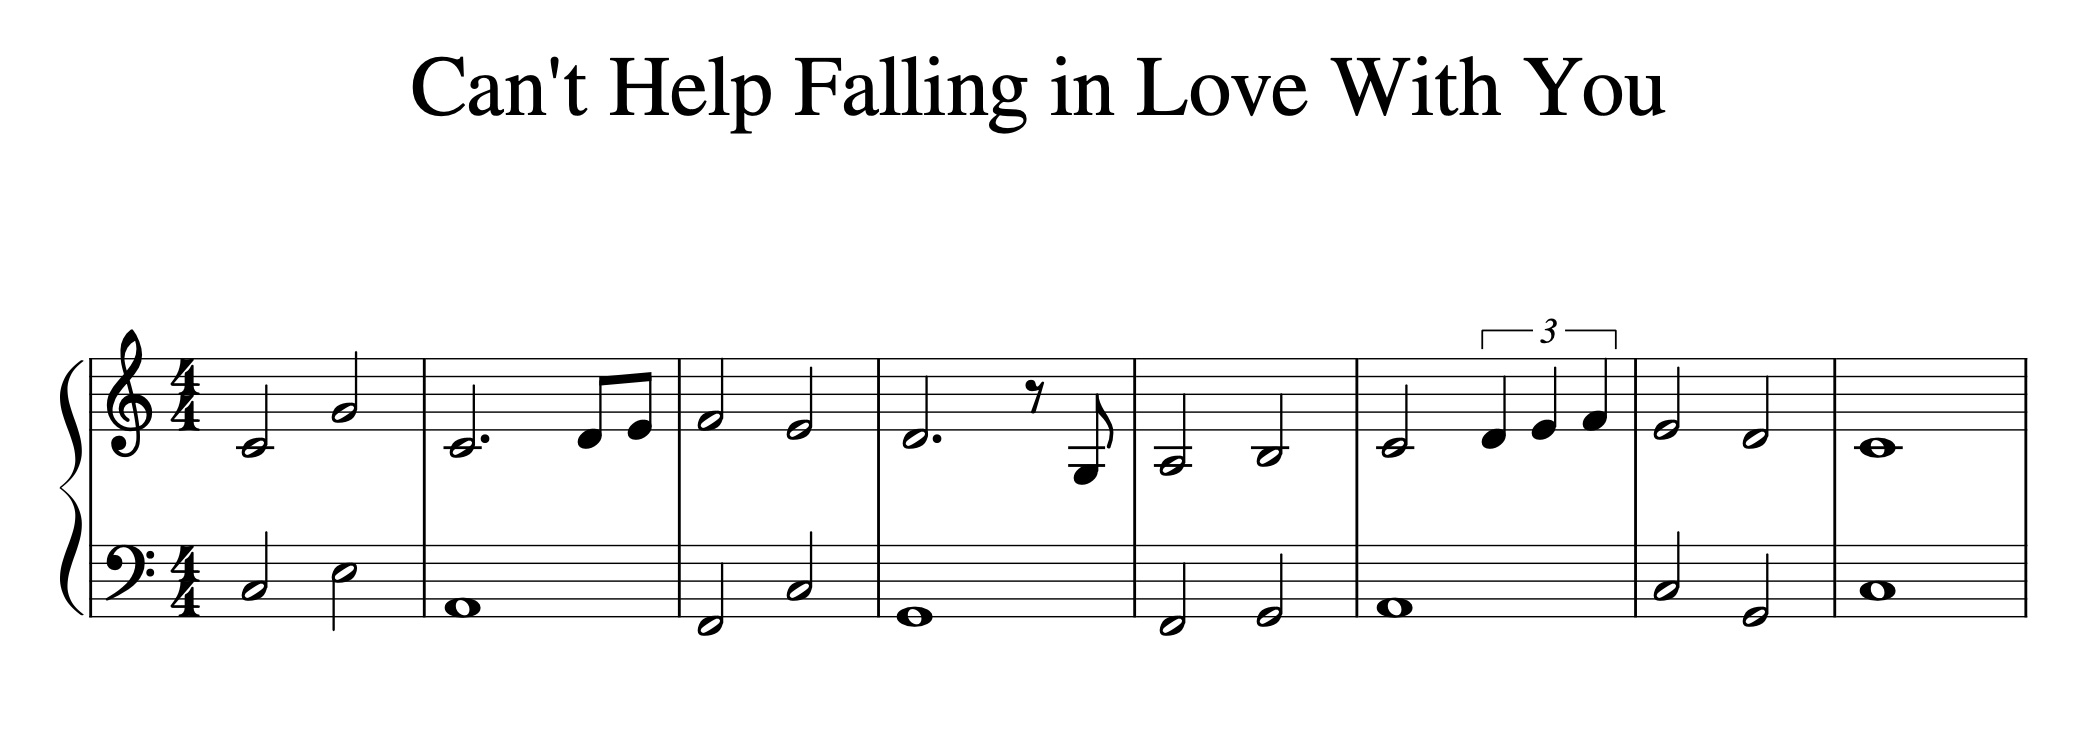 Can't Help Falling in Love With You Piano Sheet Easy